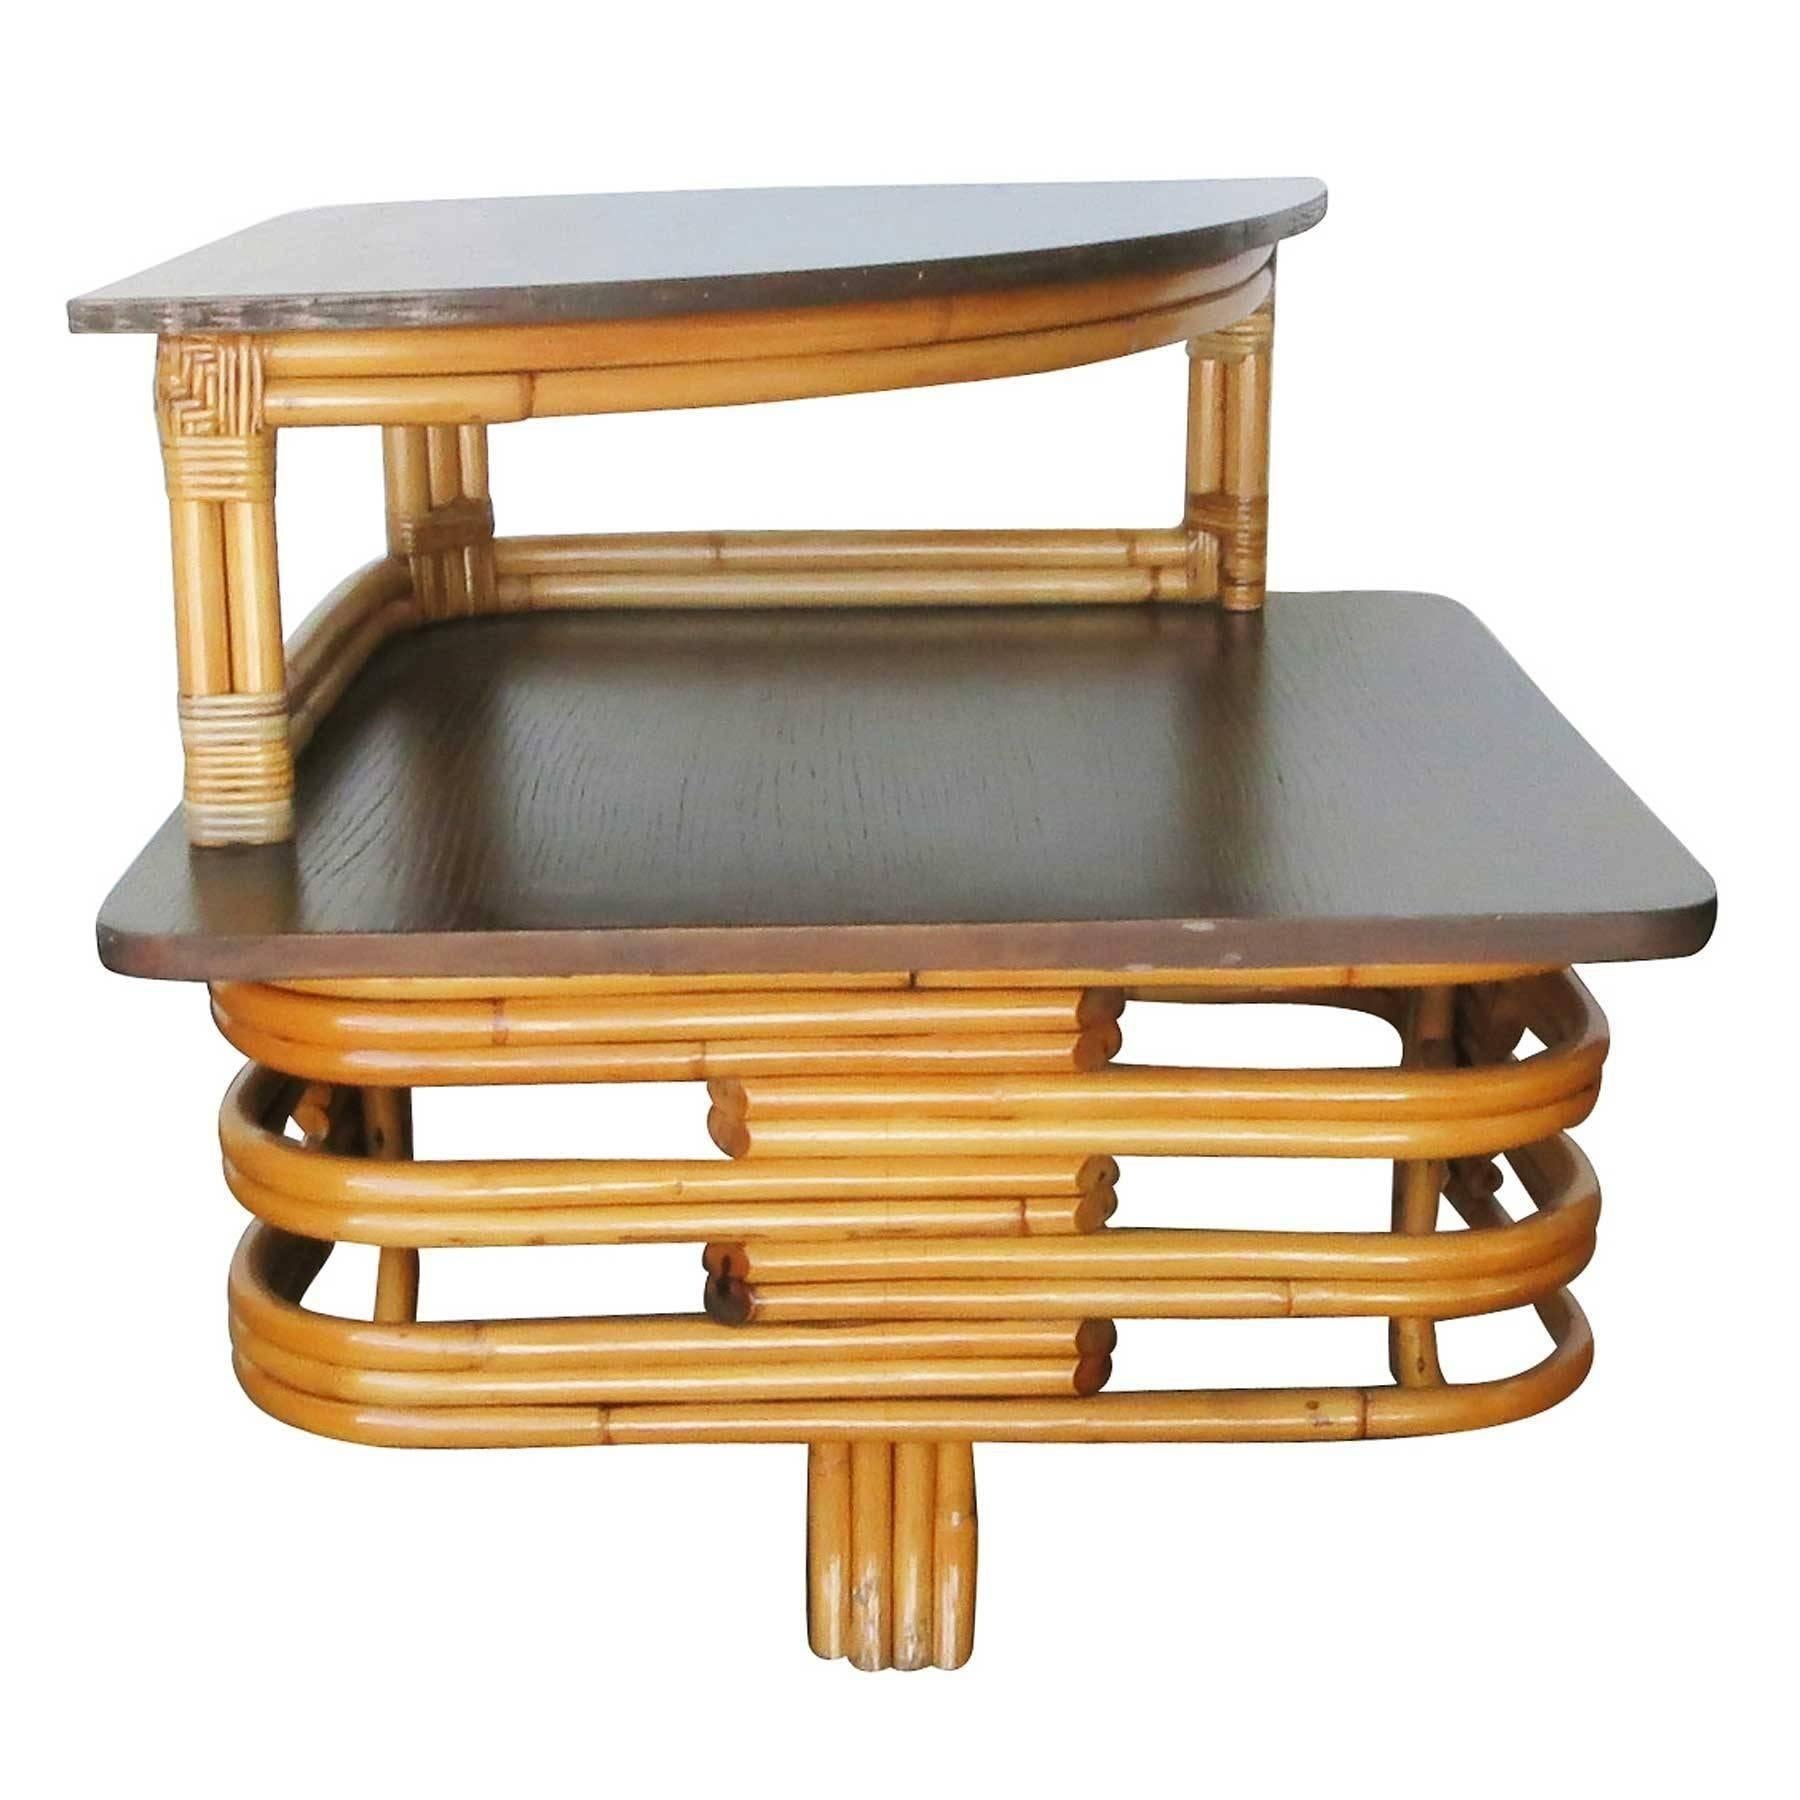 Vintage stacked cut-out rattan two-tier corner side table with a mahogany top.
1950, United States
We only purchase and sell only the best and finest rattan furniture made by the best and most well-known American designers and manufacturers